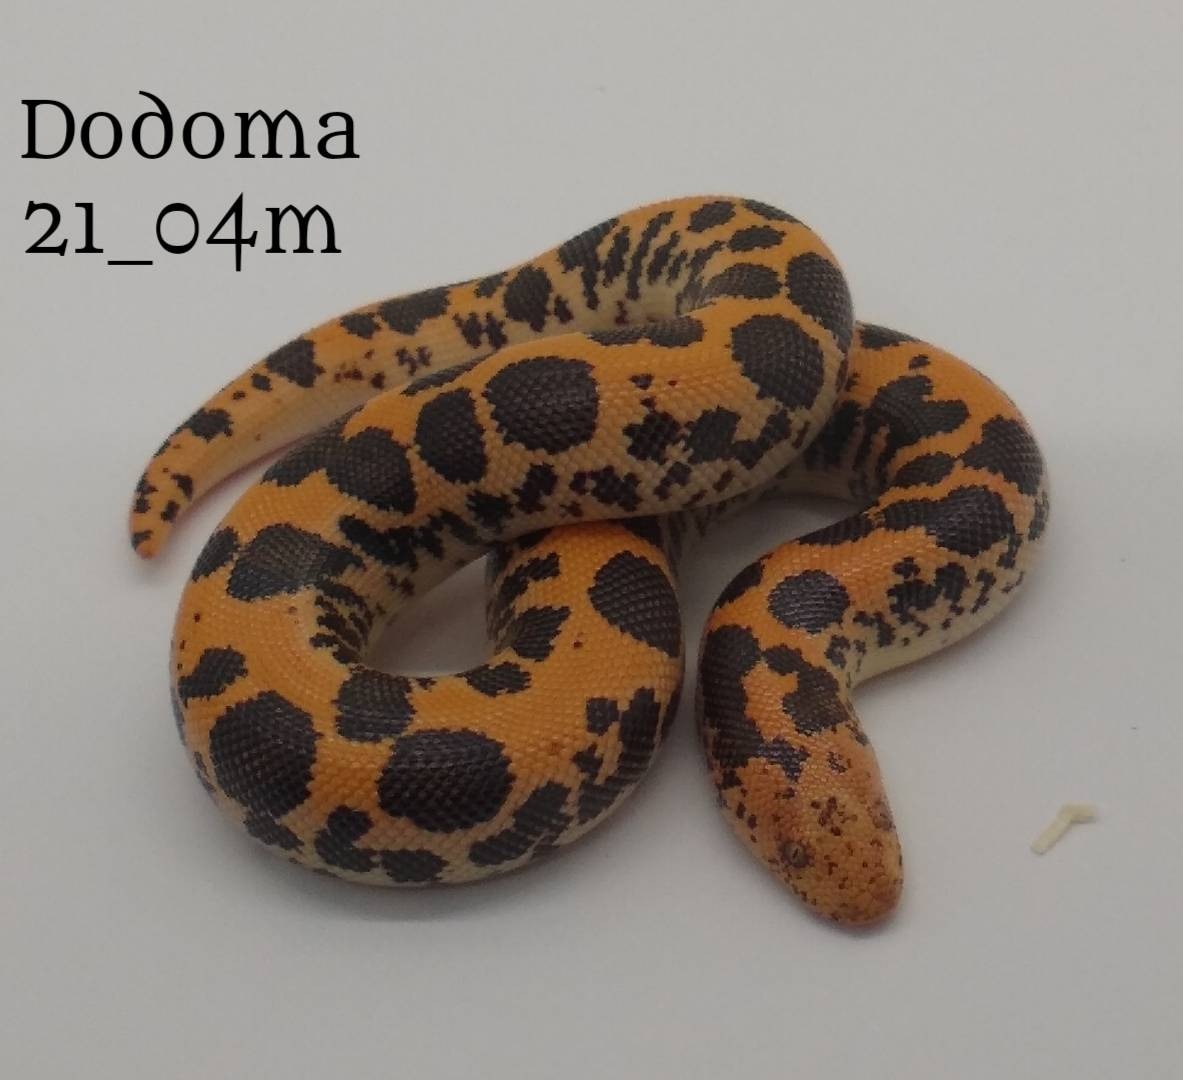 Pure Reduced-Pattern Dodoma Sand Boa by West Ridge Reptiles